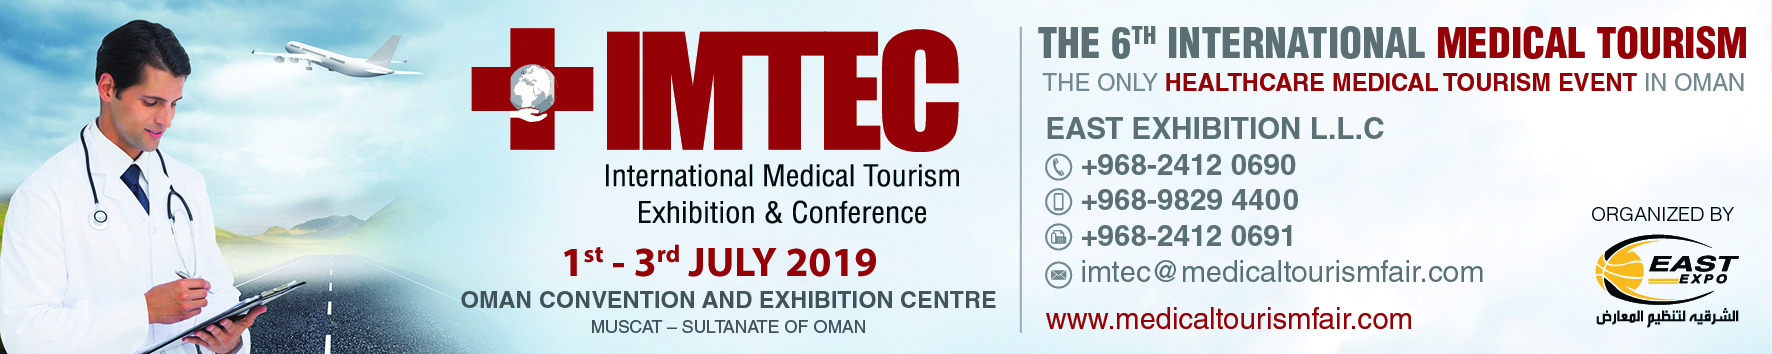 Photos of International Medical Exhibition & Conference (IMTEC)